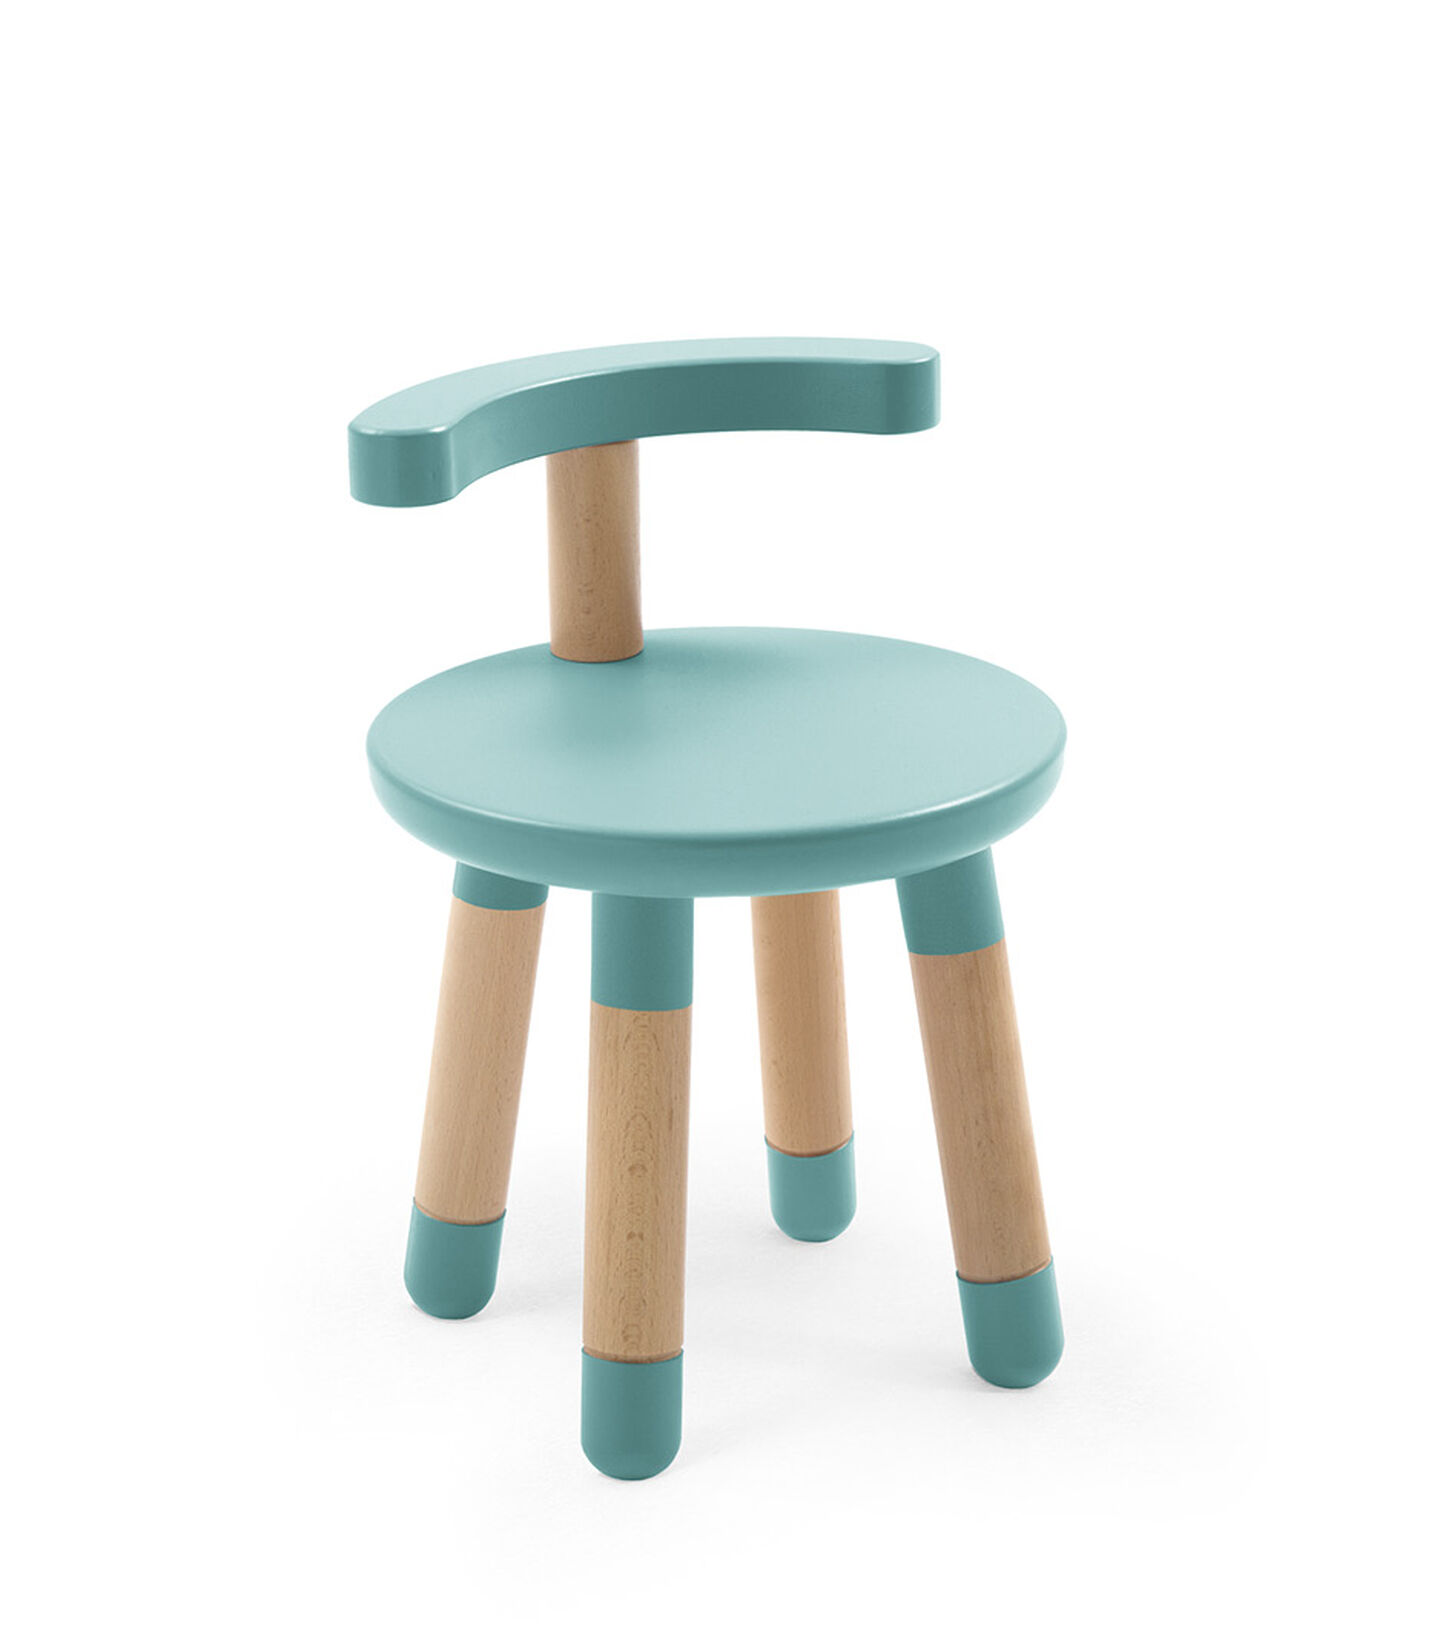 Stokke® MuTable™ Chair Mint V1, Mint, mainview view 2